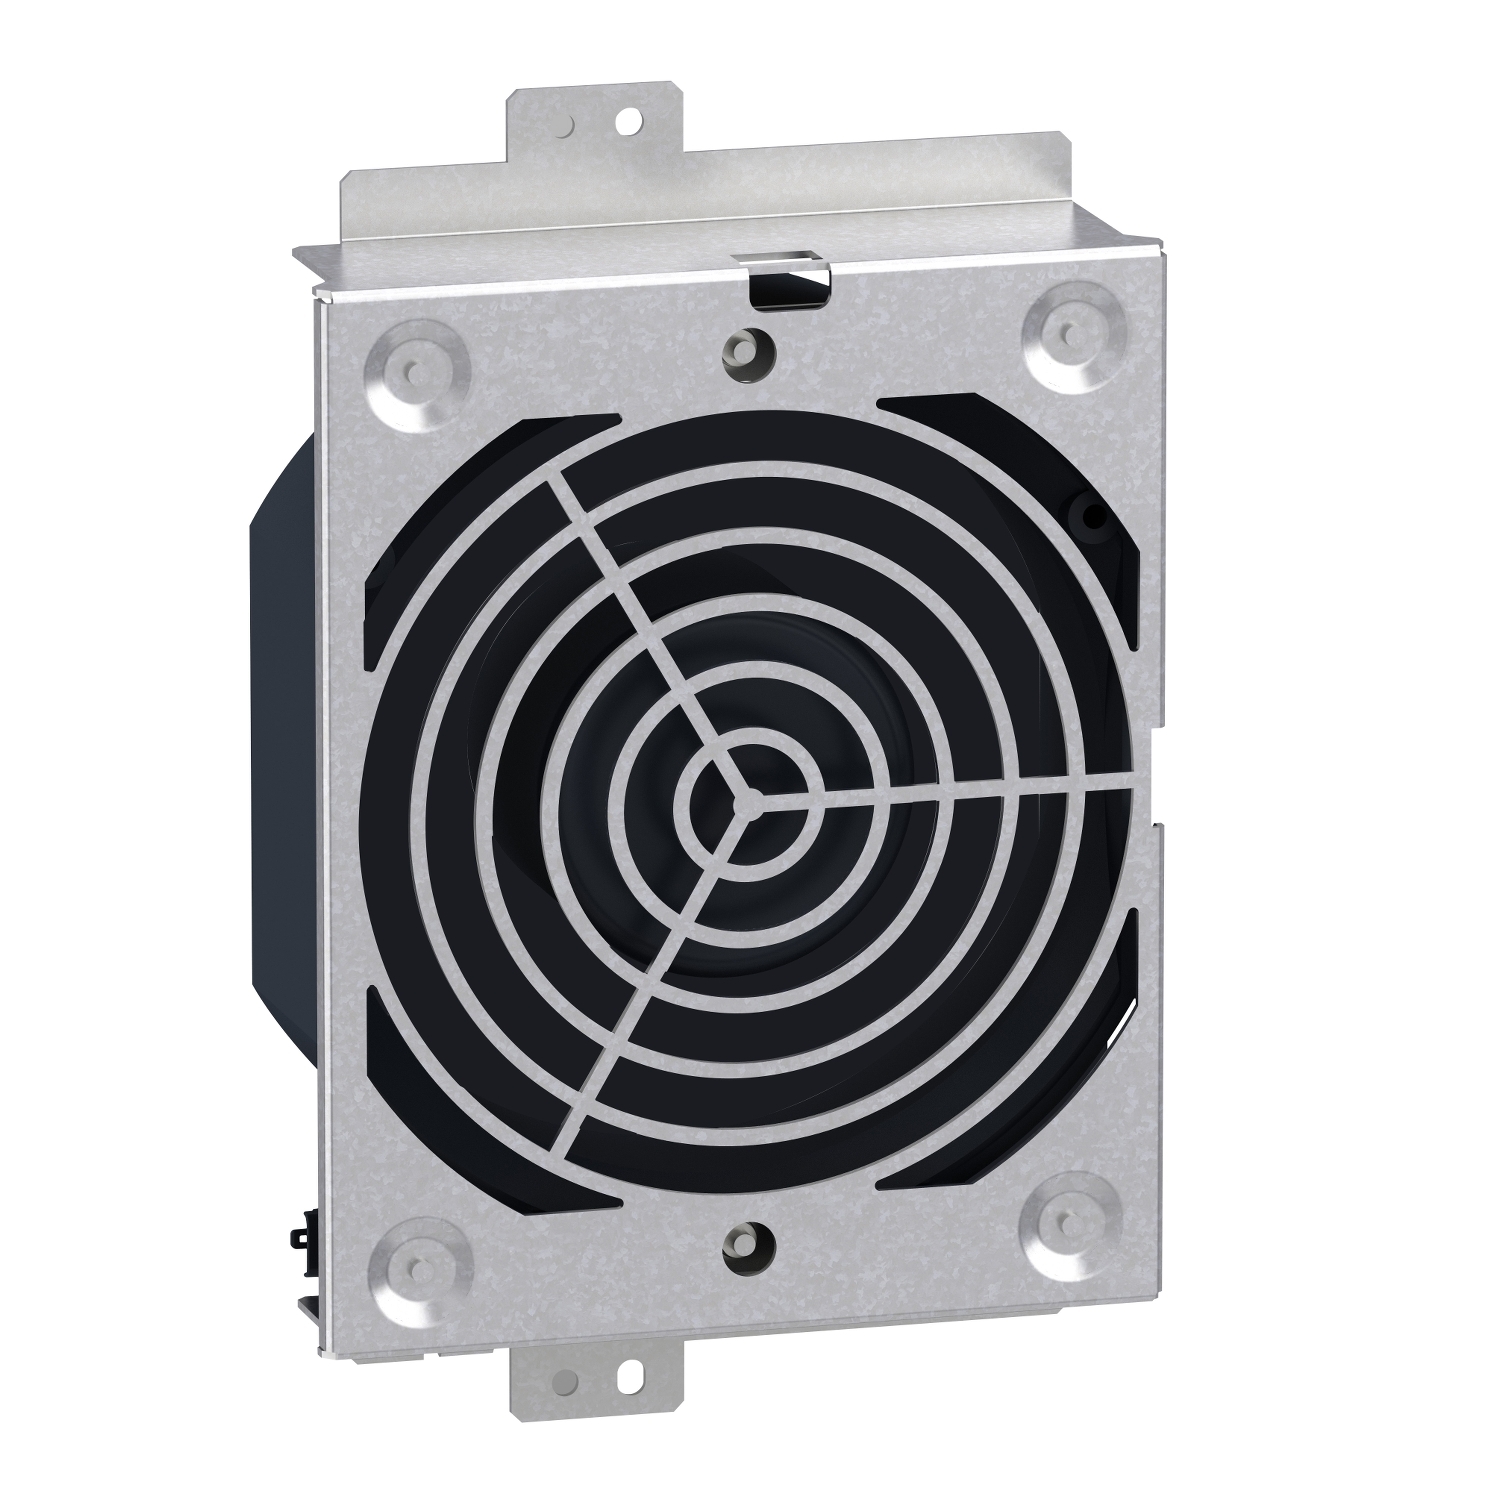 Wear part, enclosure door, fan for variable speed drive, Altivar Process 600 900, from 30 to 90kW